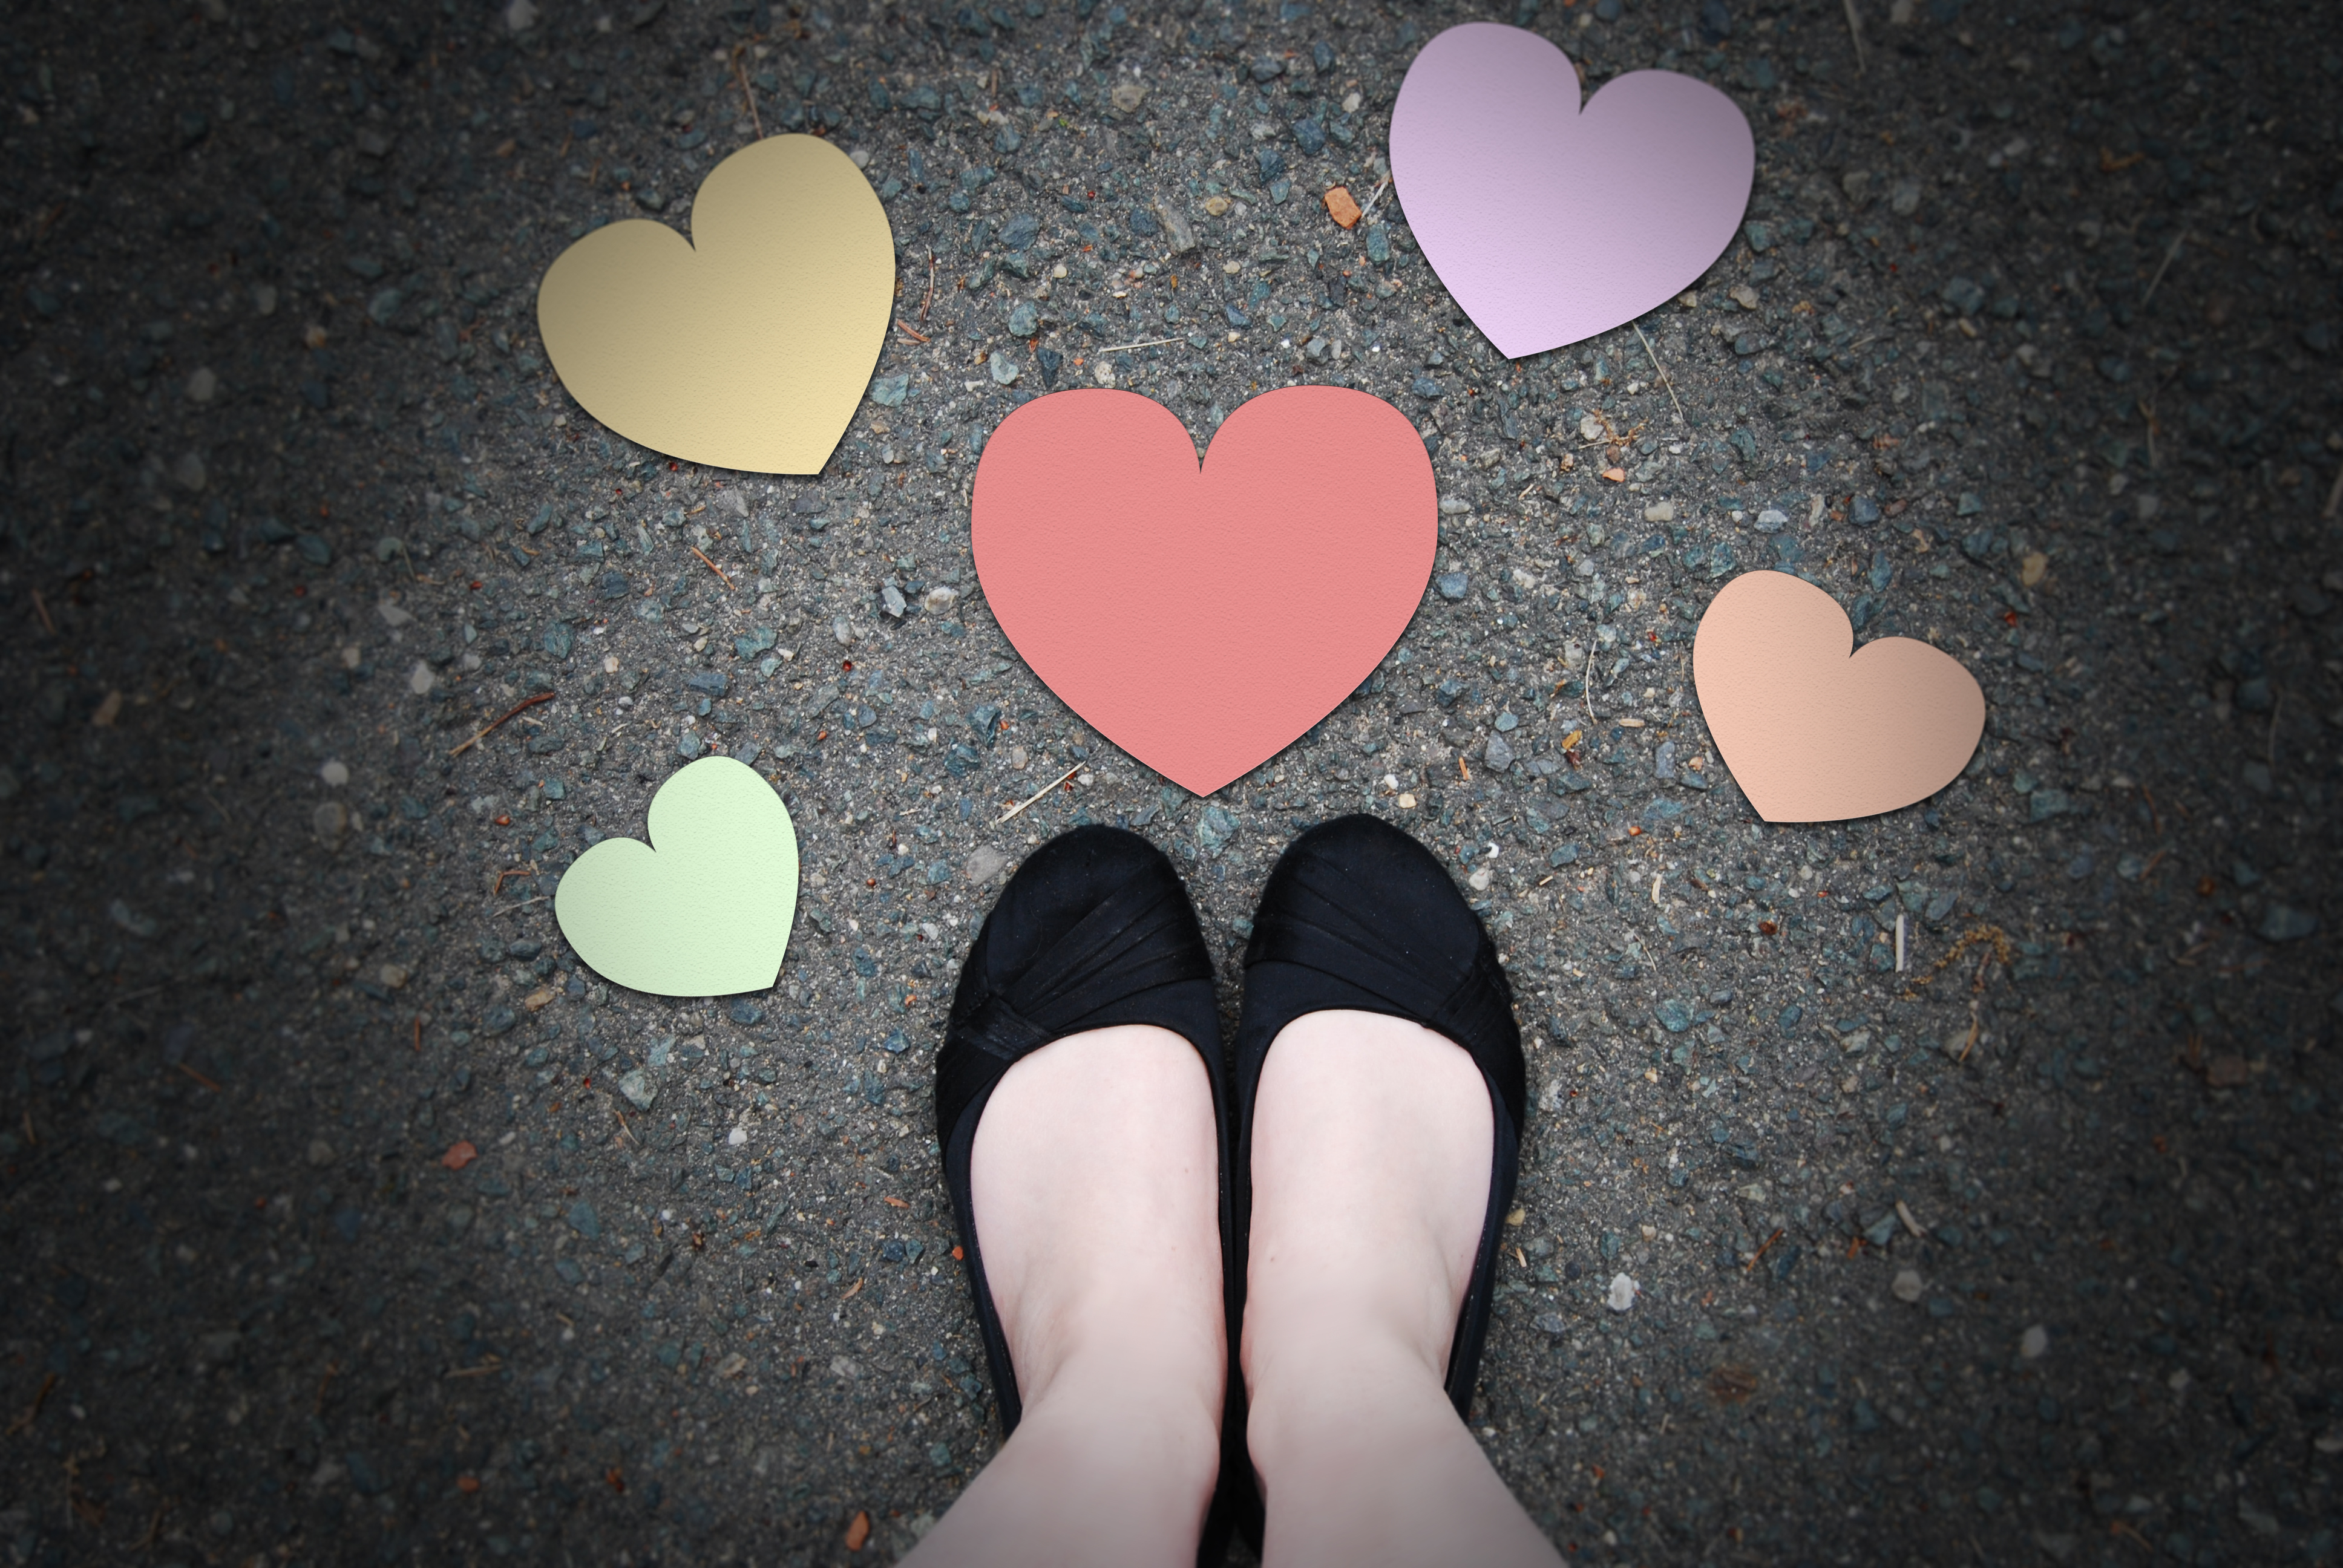 looking down on pavement, at the very bottom edge are a pair of pale white feet in black fabric shoes, around them are colorful paper hearts of varying sizes